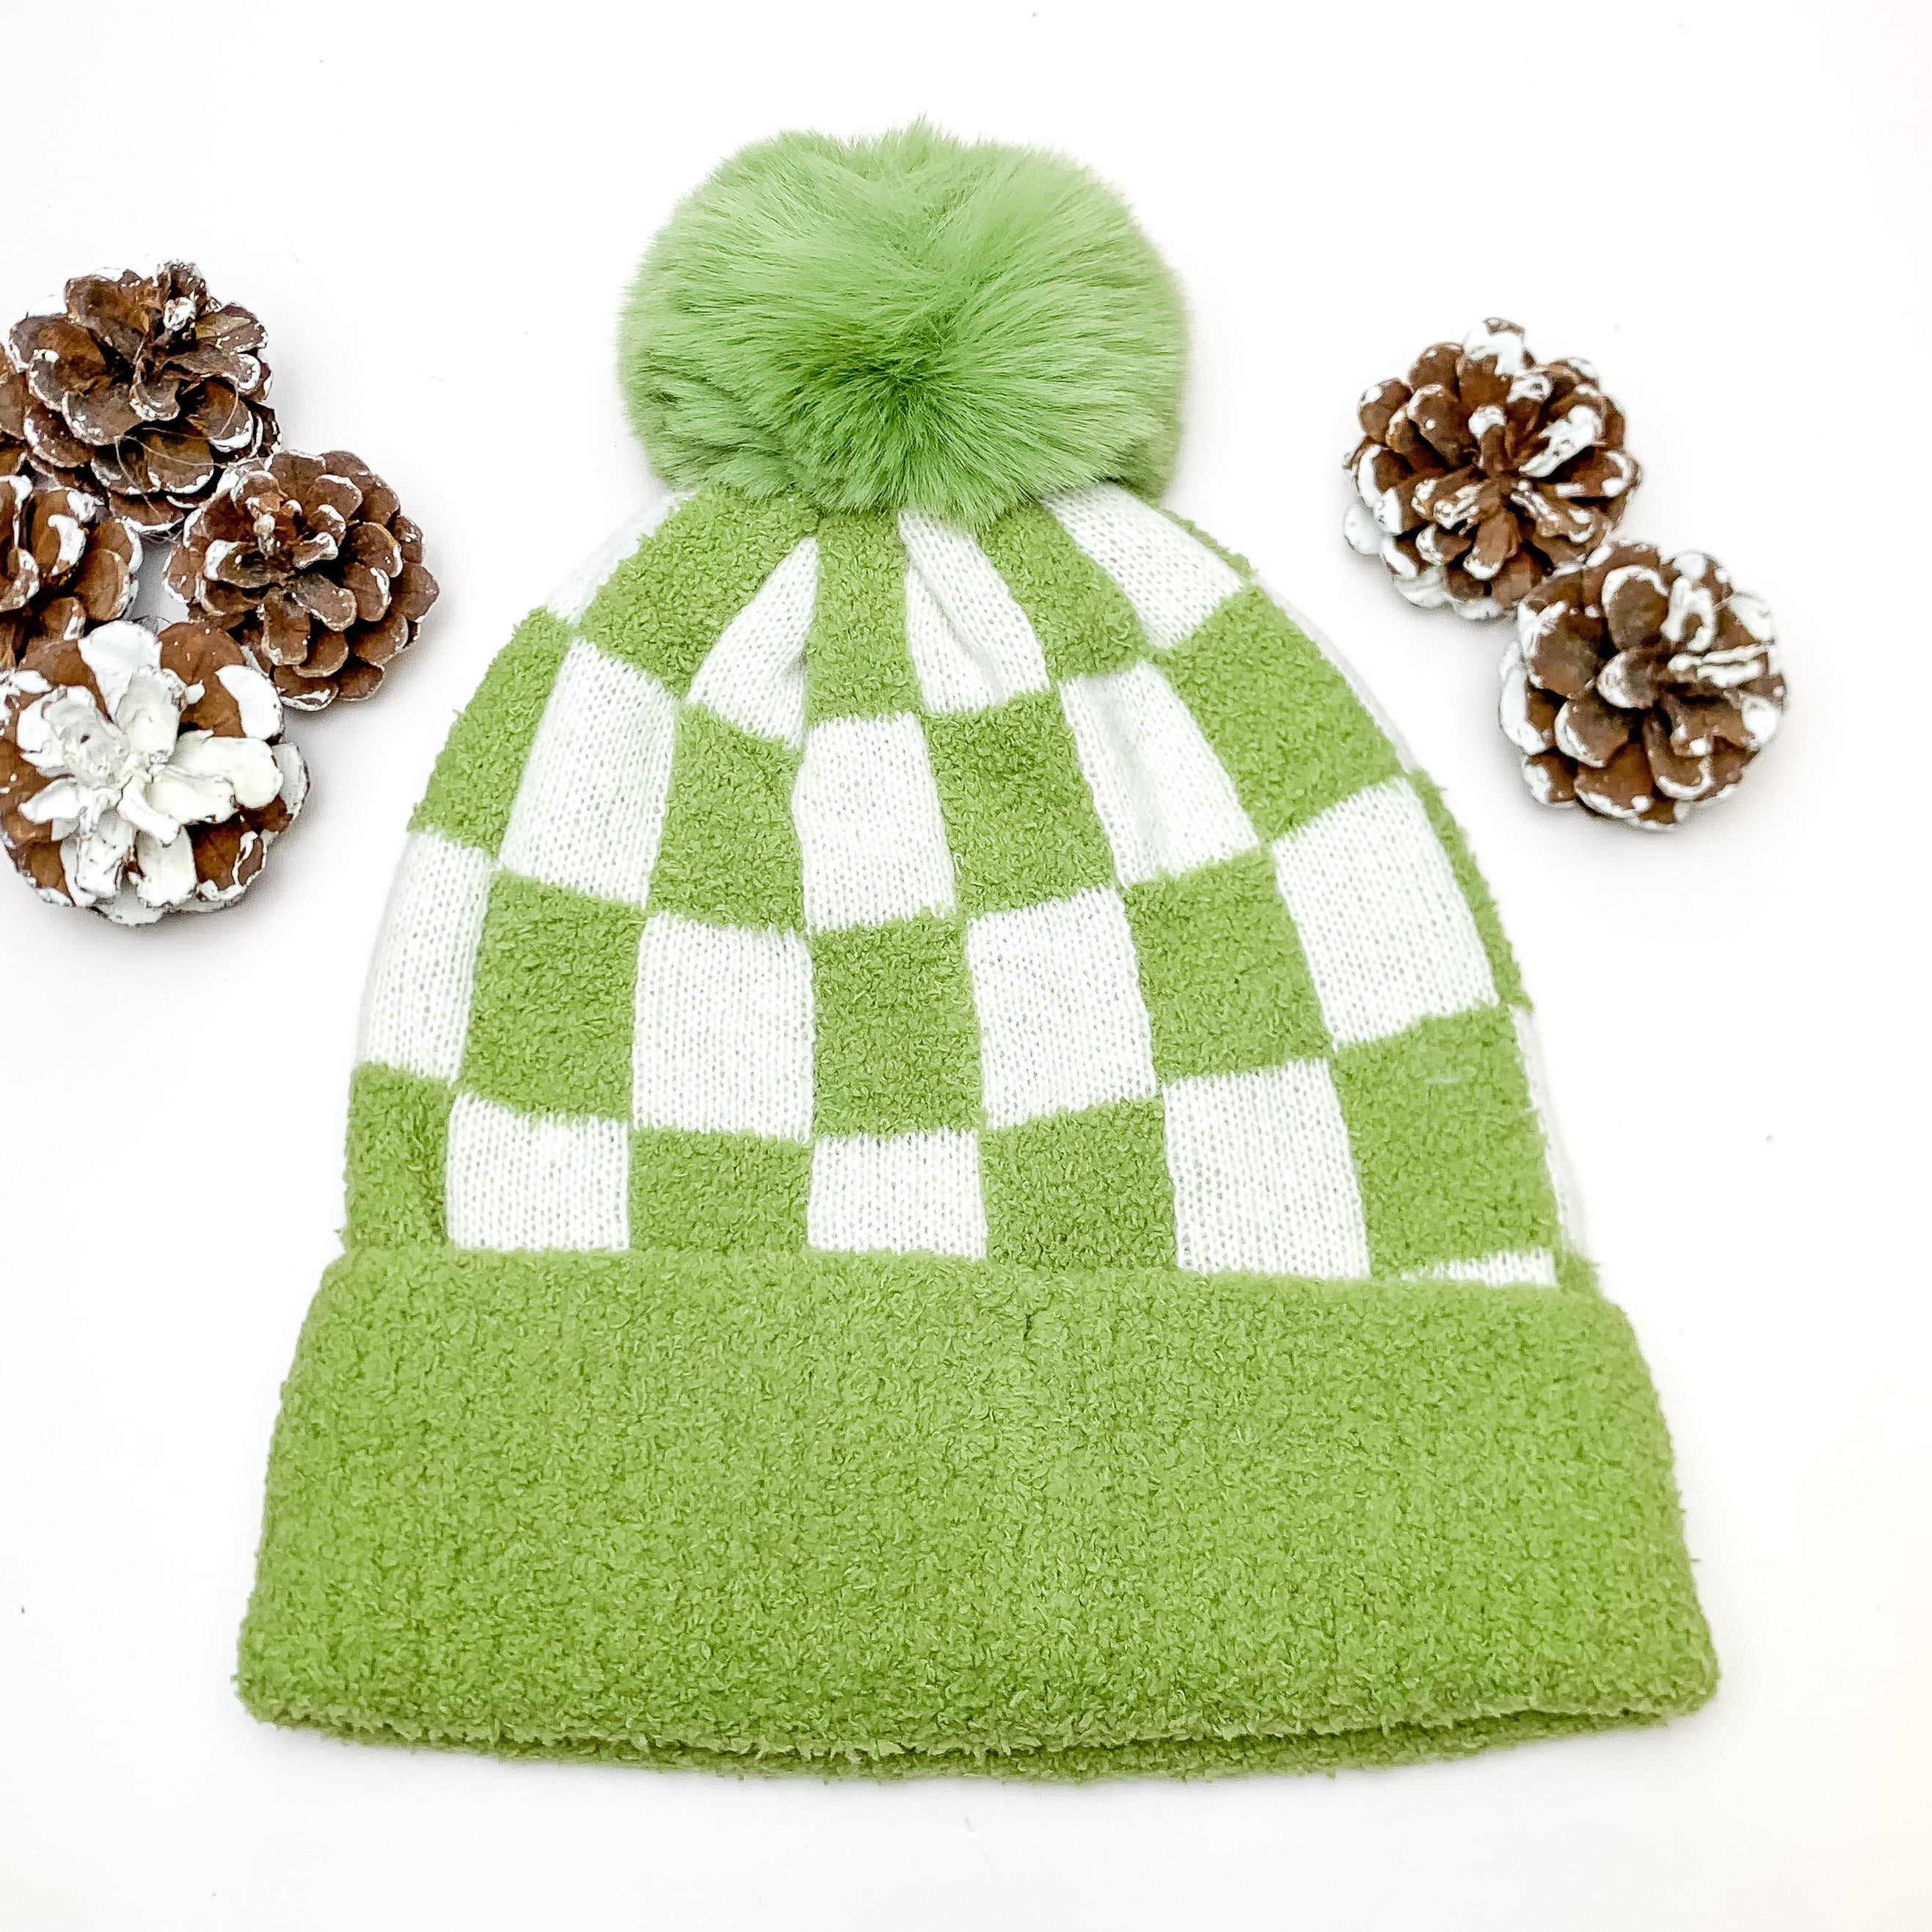 Checkered Beanie in Olive Green and White. This beanie is pictured on a white background with pinecones around it.